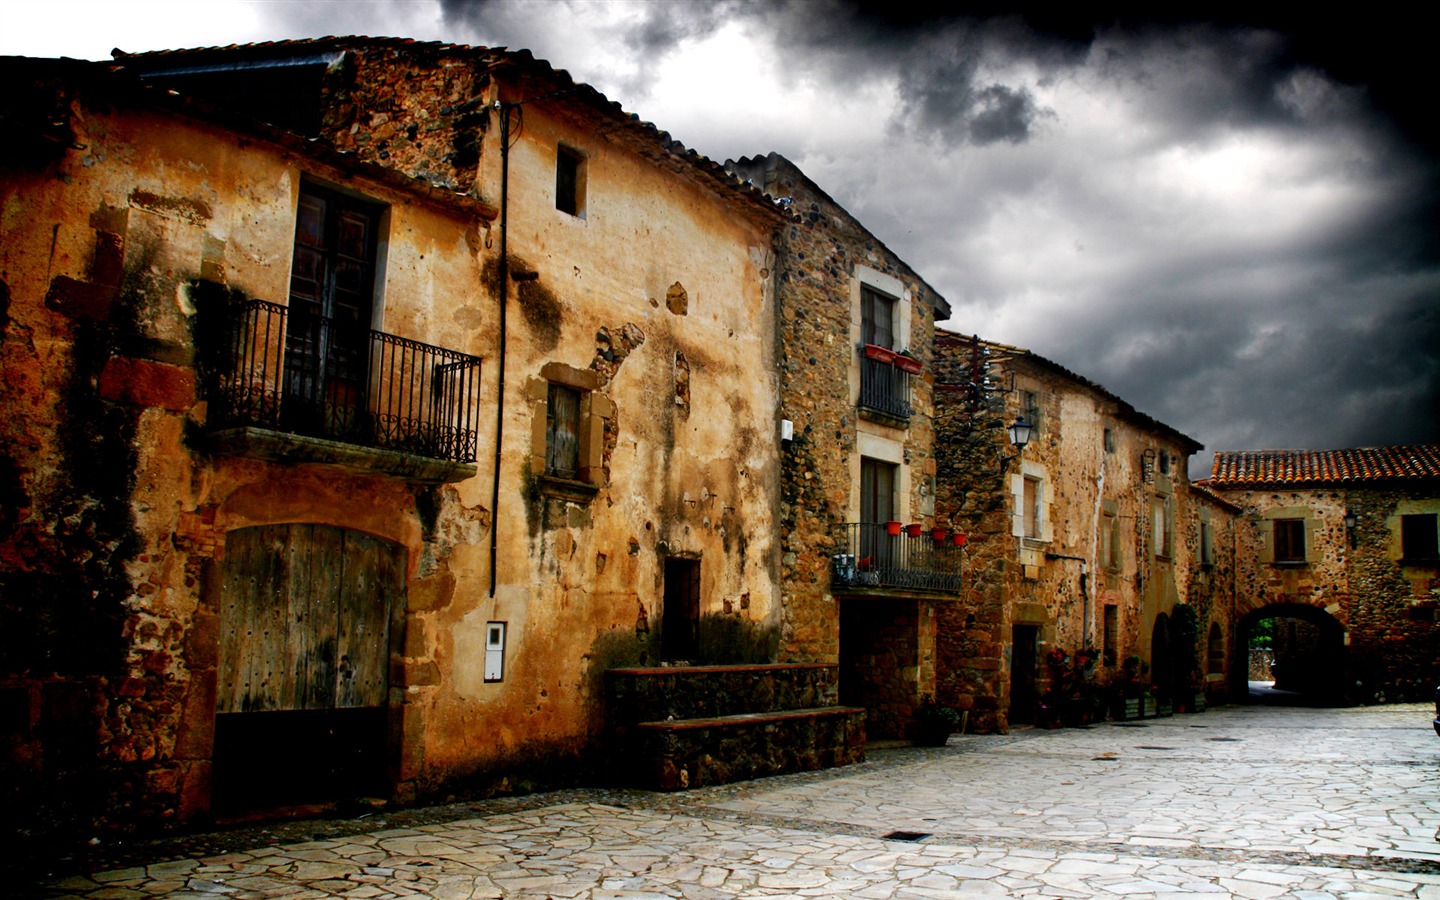 Spain Girona HDR-style wallpapers #11 - 1440x900